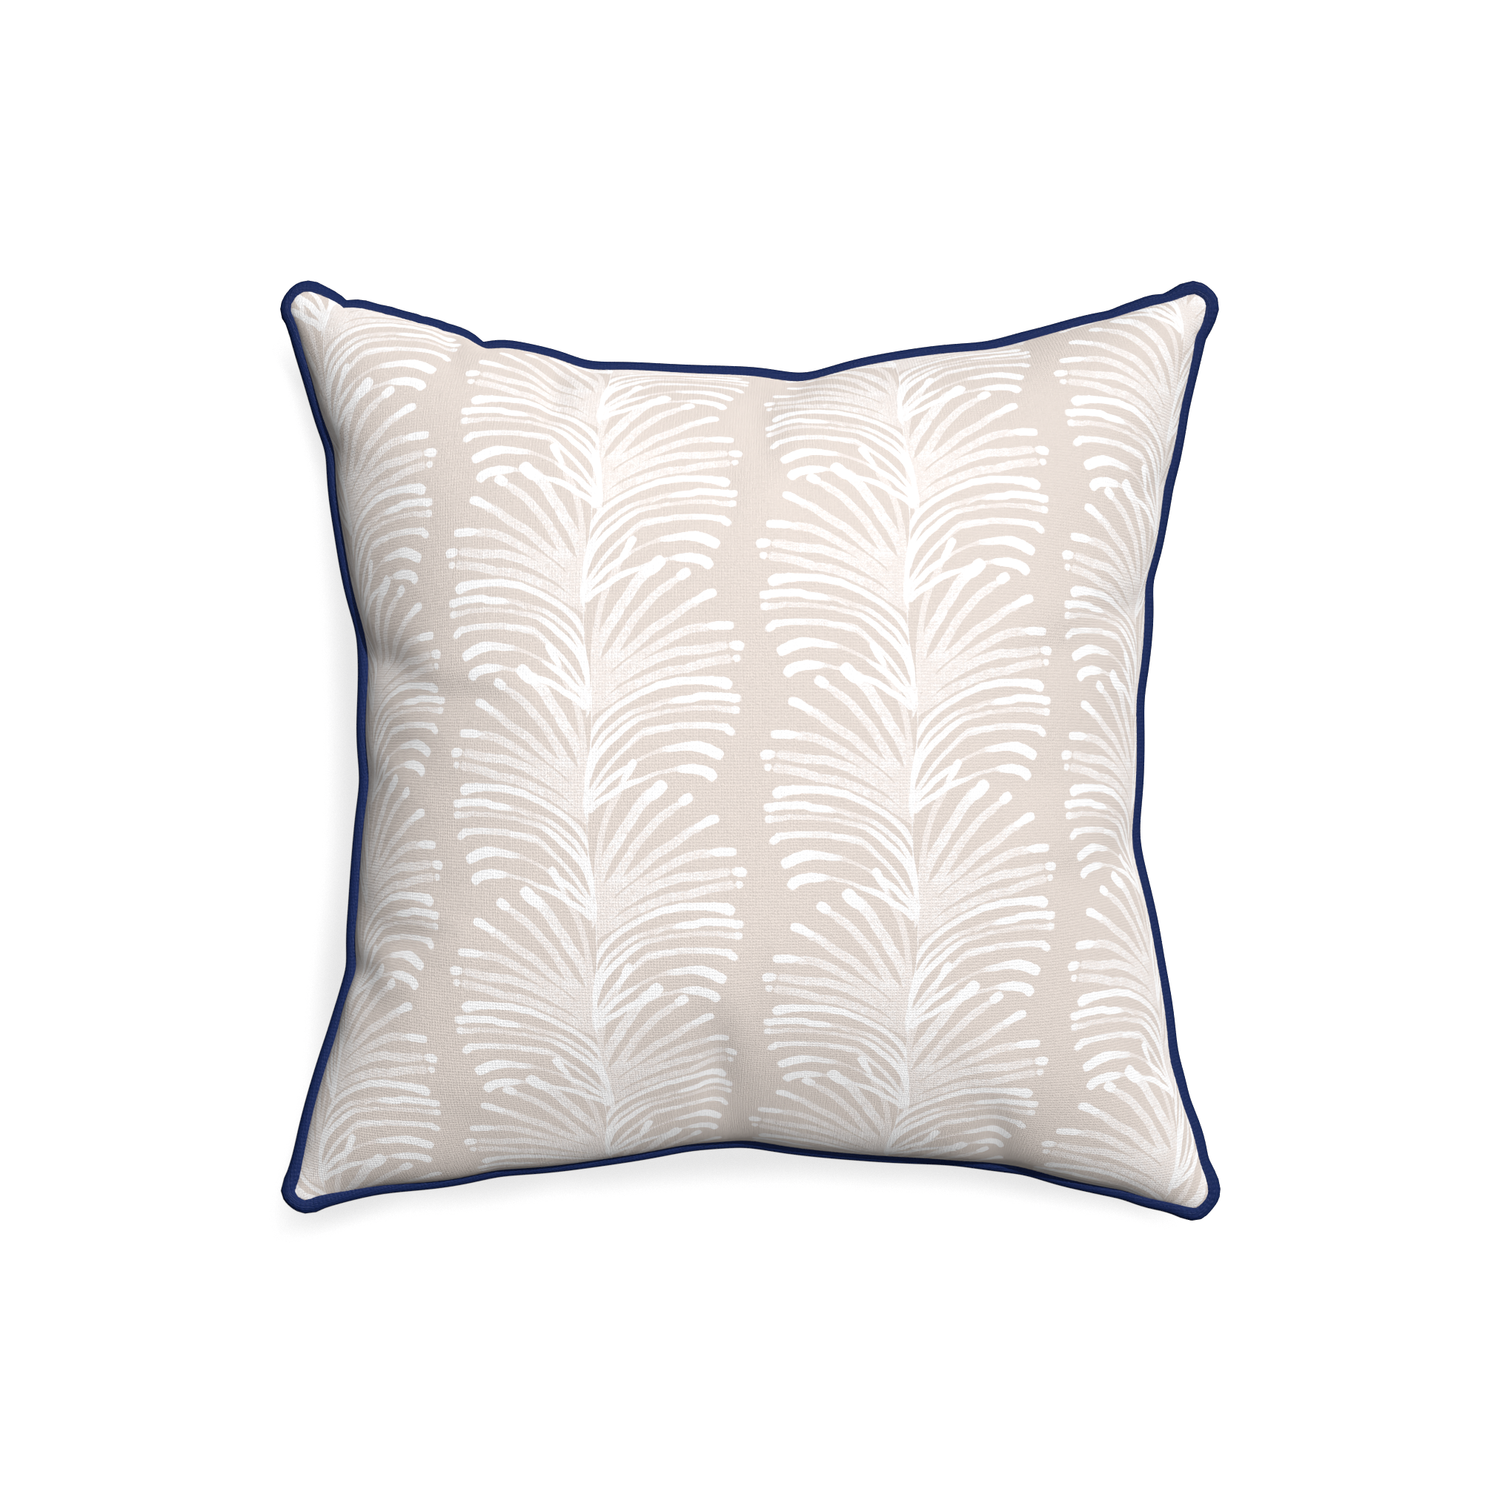 20-square emma sand custom pillow with midnight piping on white background